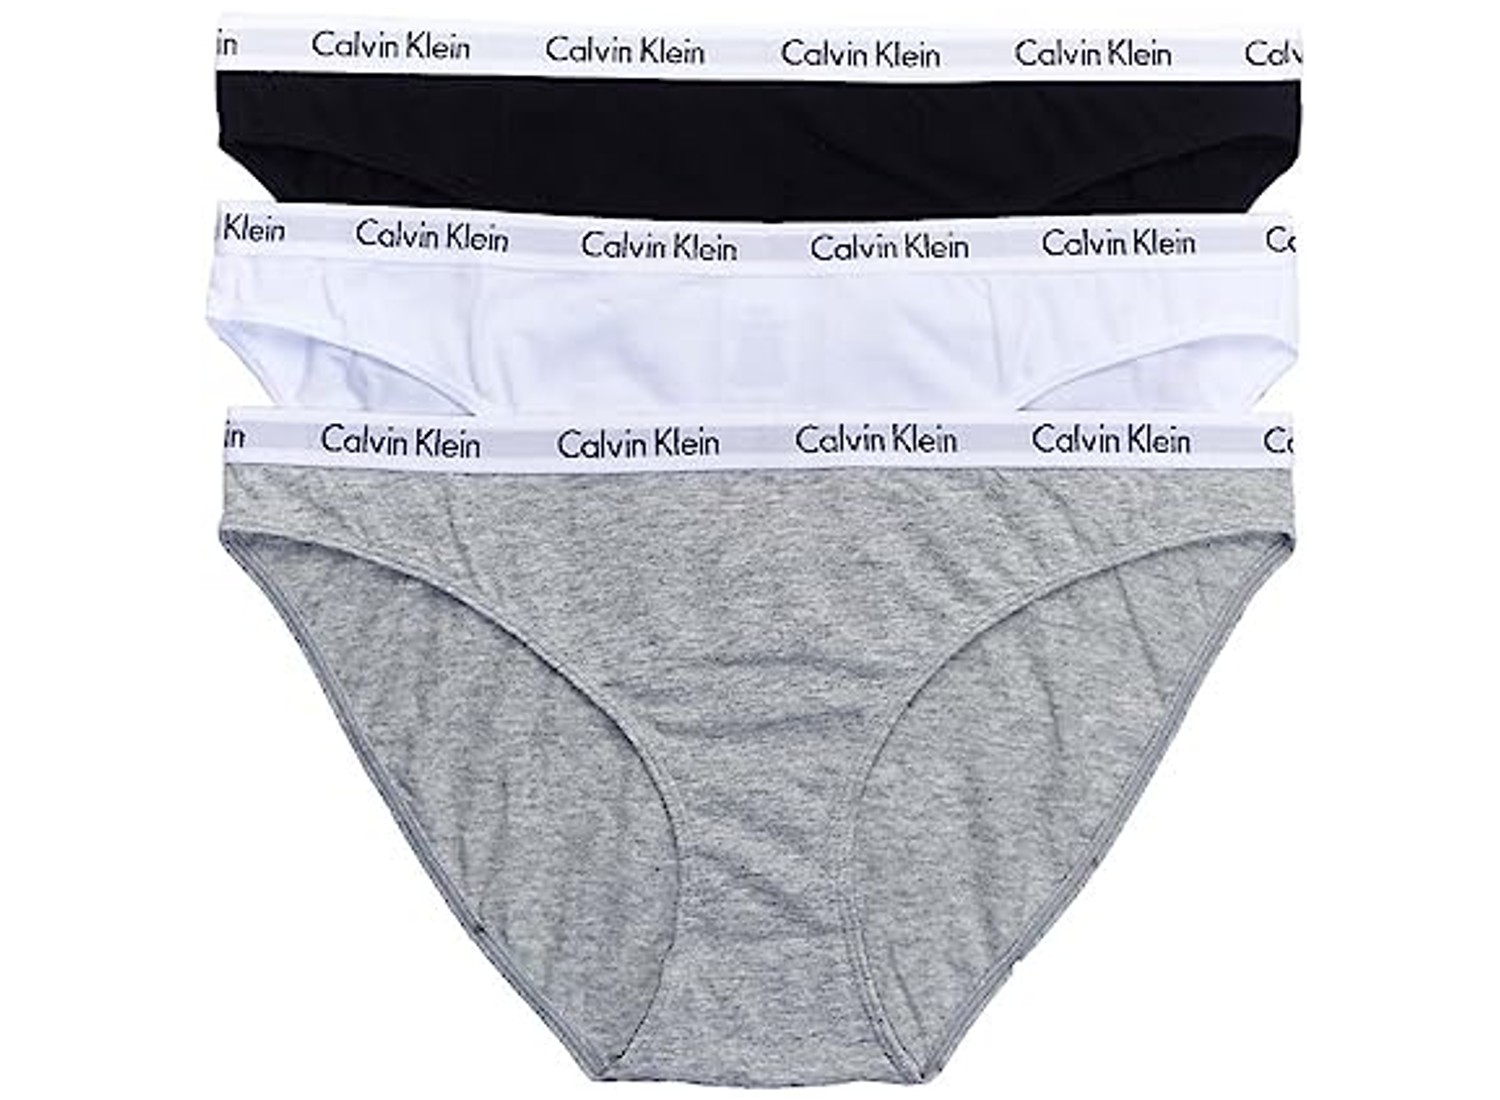 Save up to 60% on Calvin Klein Underwear This Prime Day – Hollywood Life